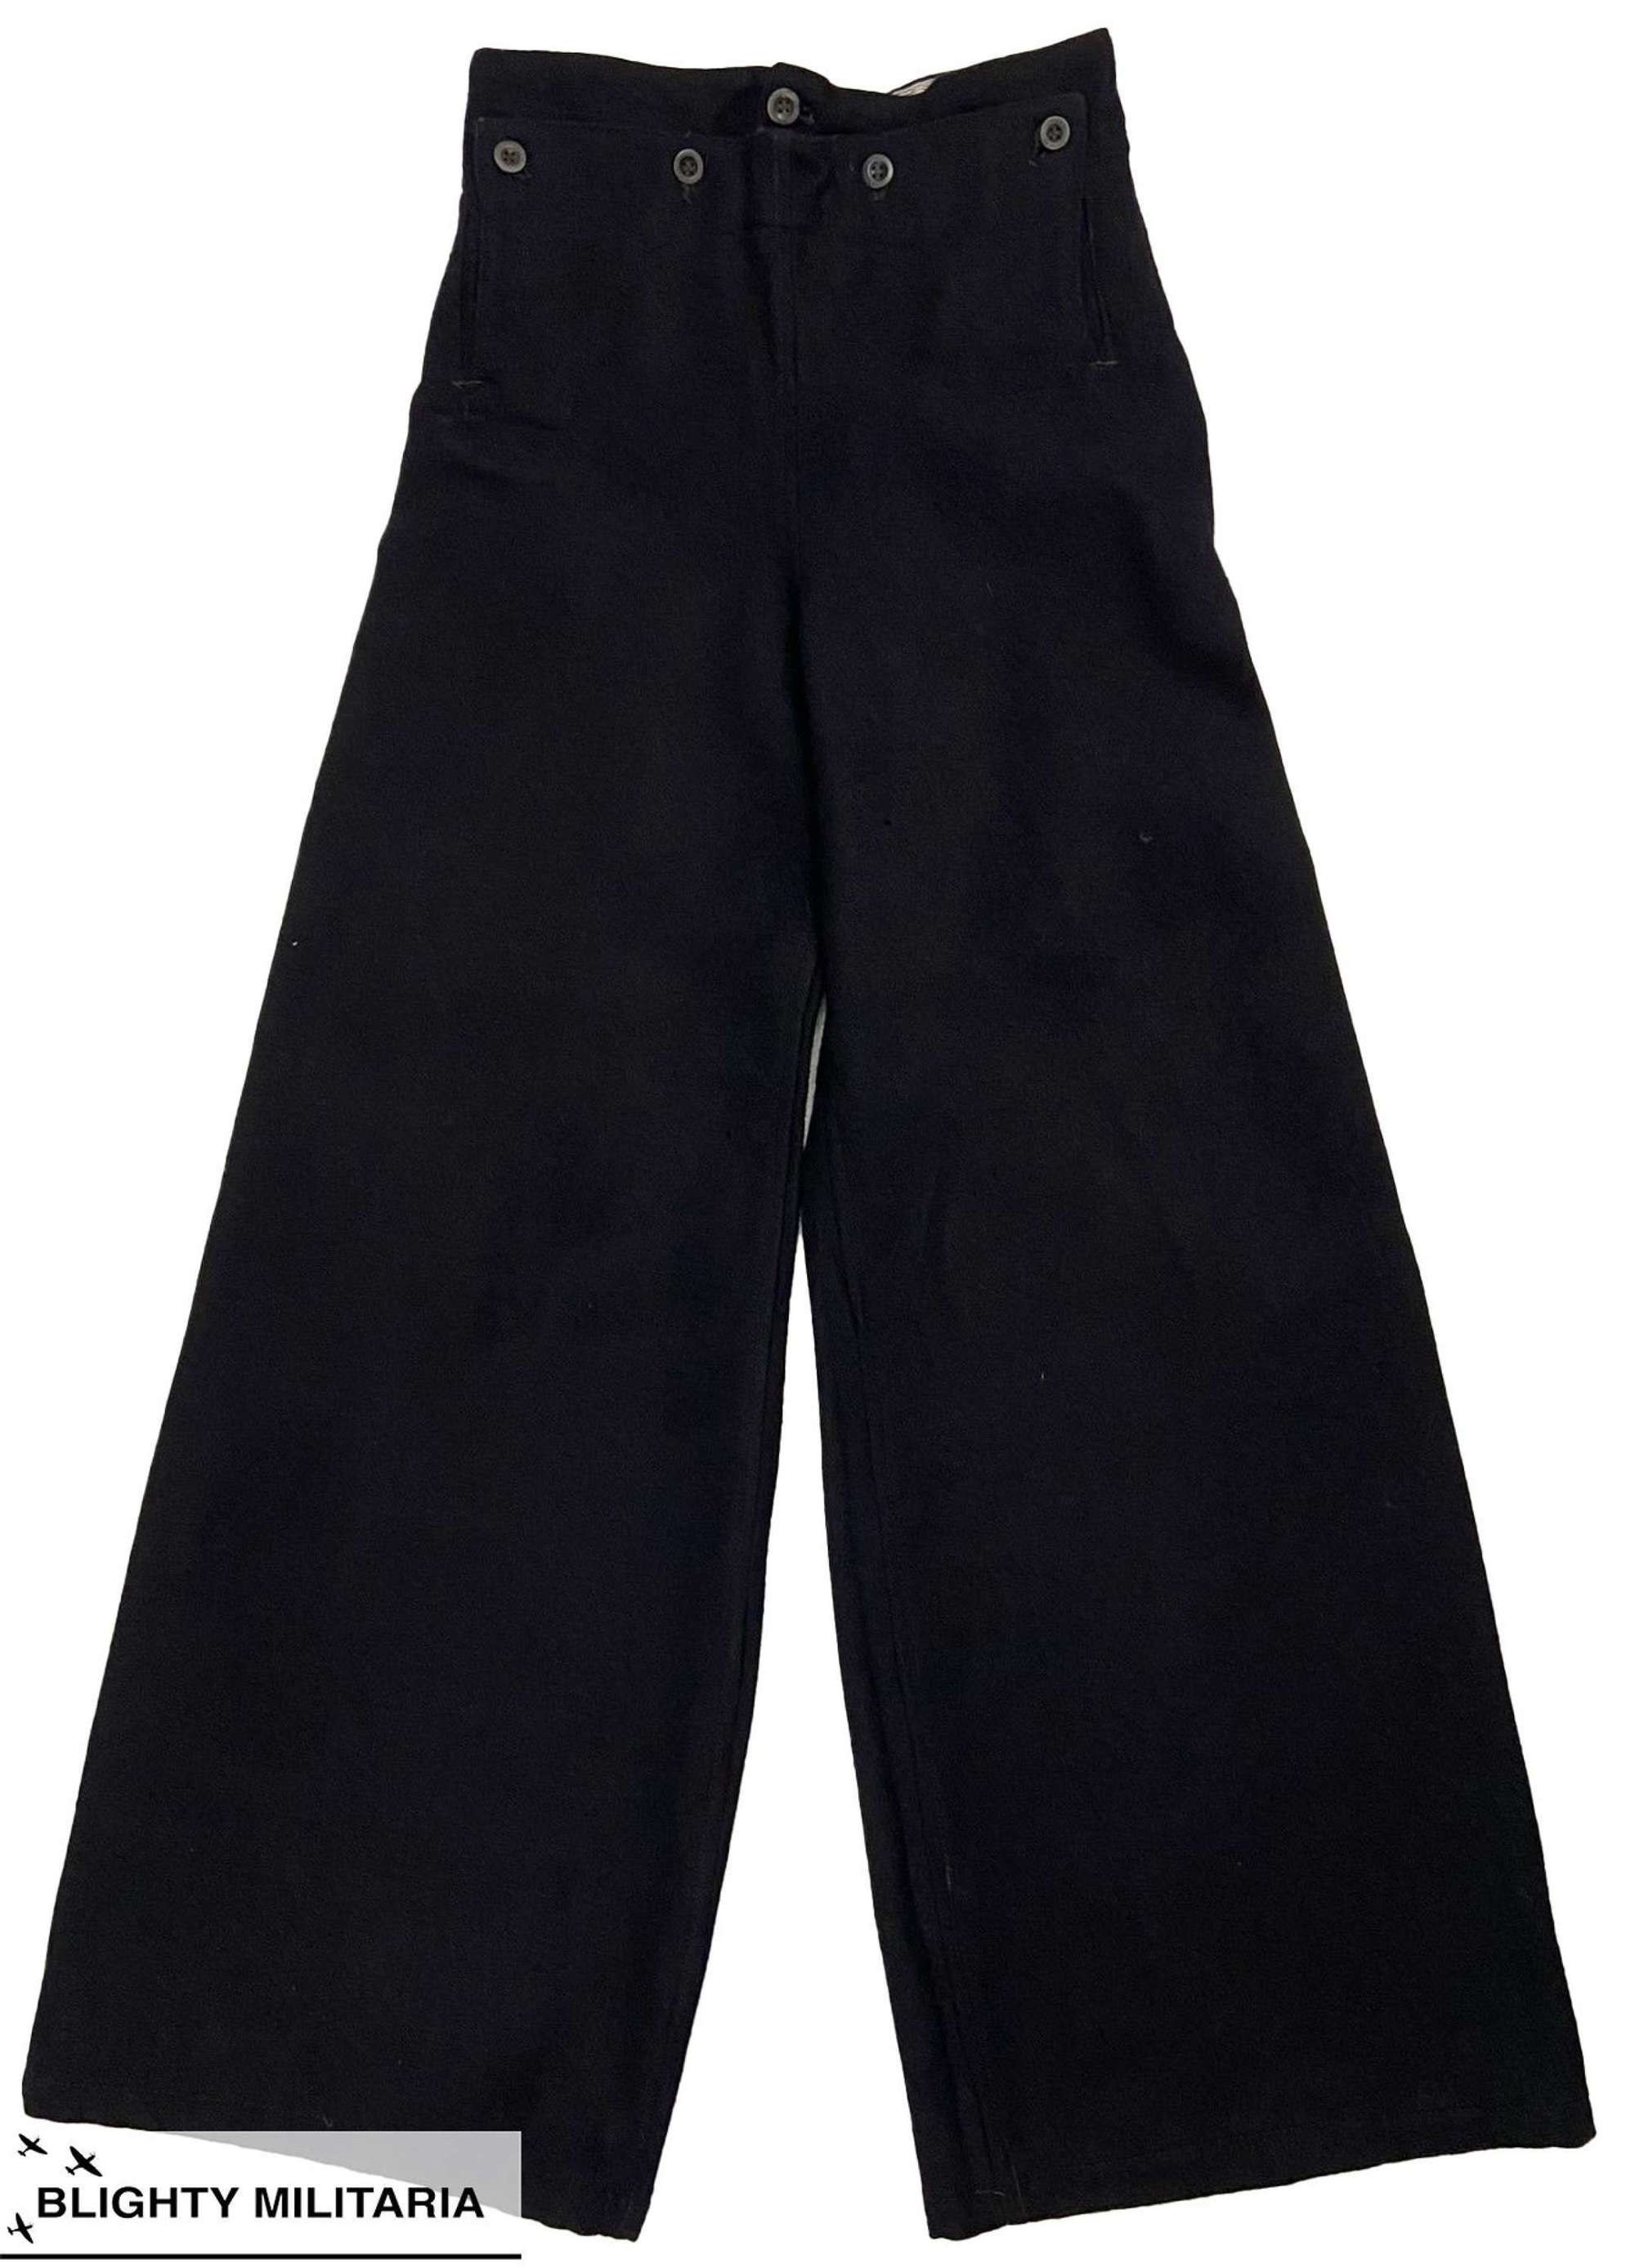 Original WW2 Period Royal Navy Able Seaman's Bell Bottom Trousers